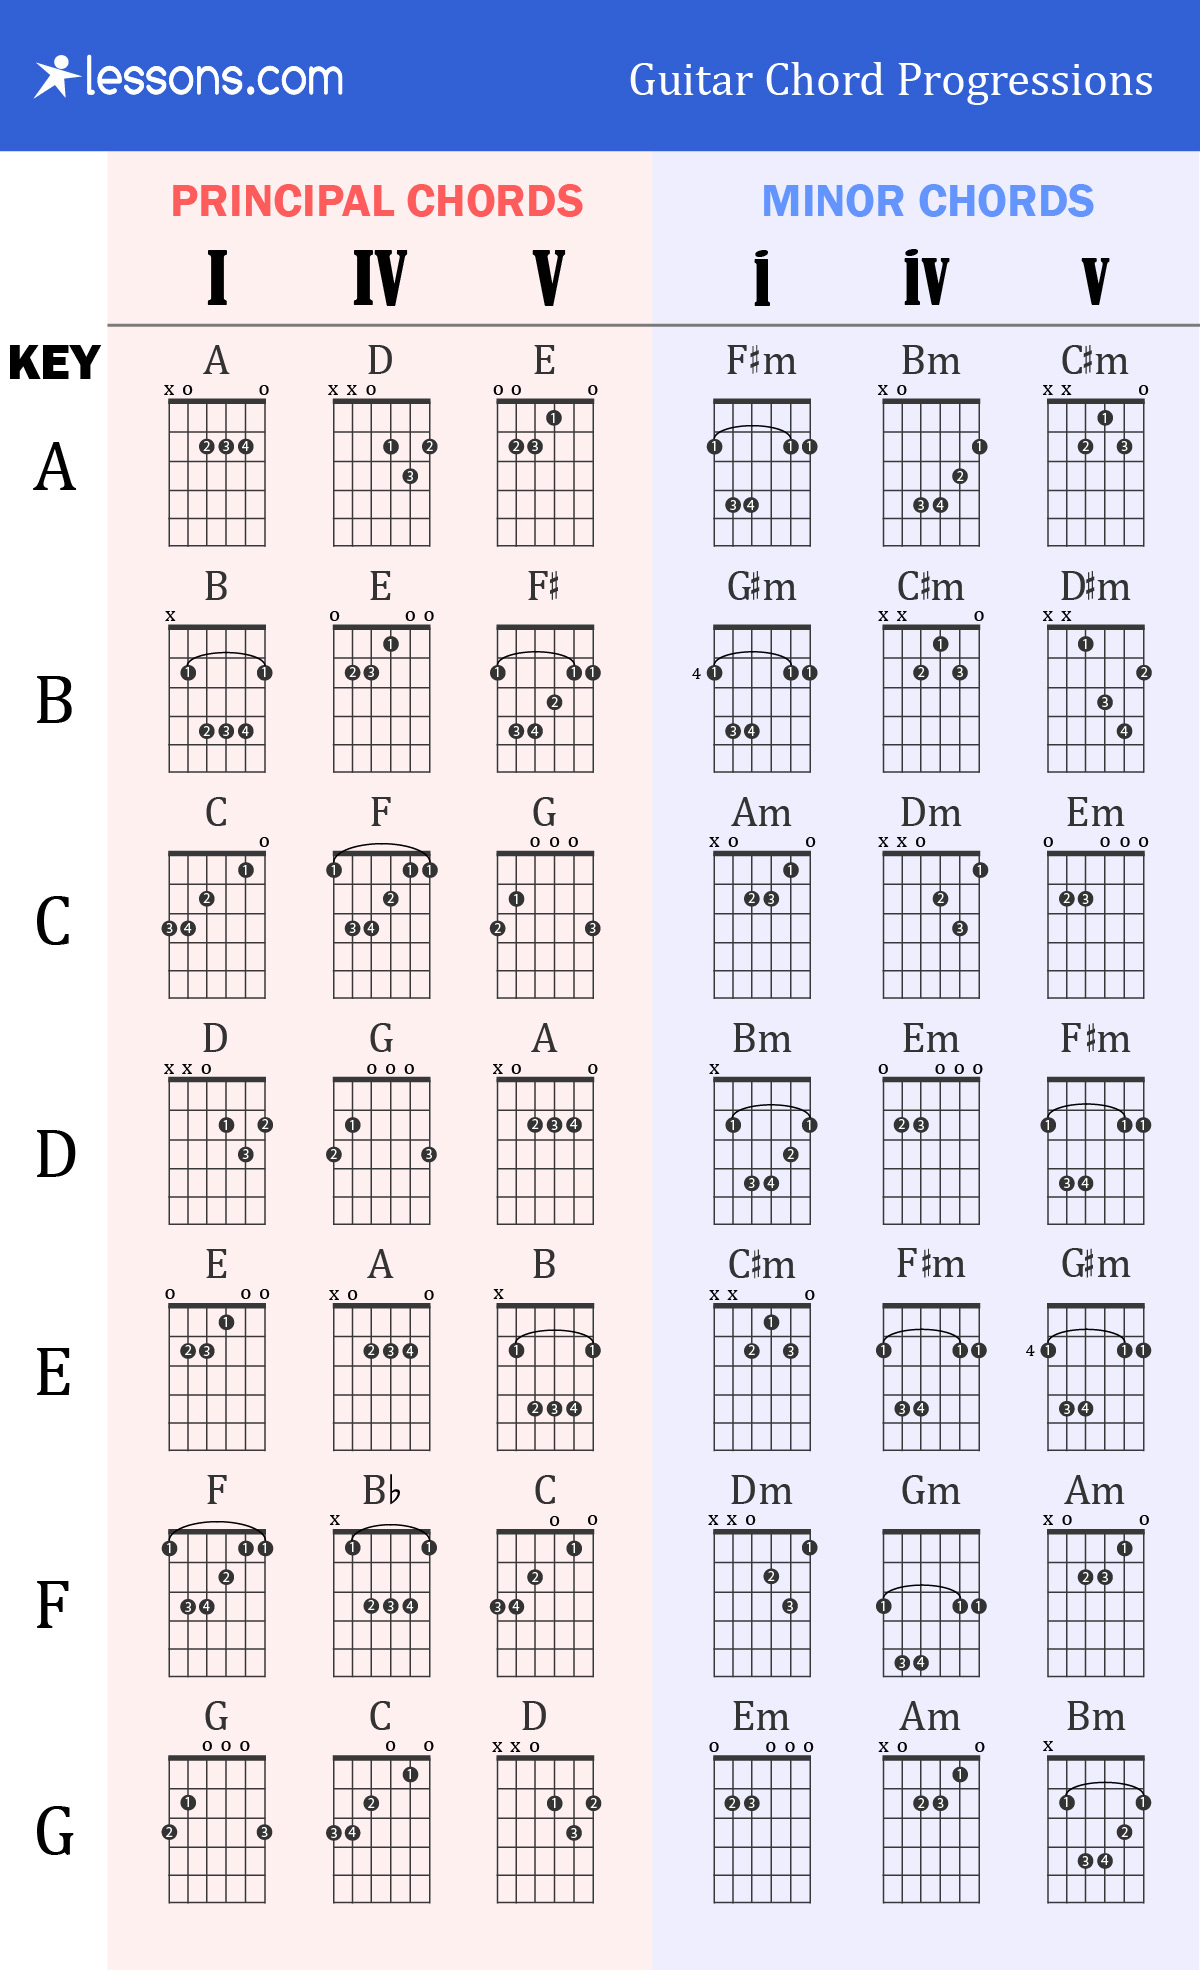 Bm Chord Guitar Guitar Chords The Complete Guide With Charts How Tos More